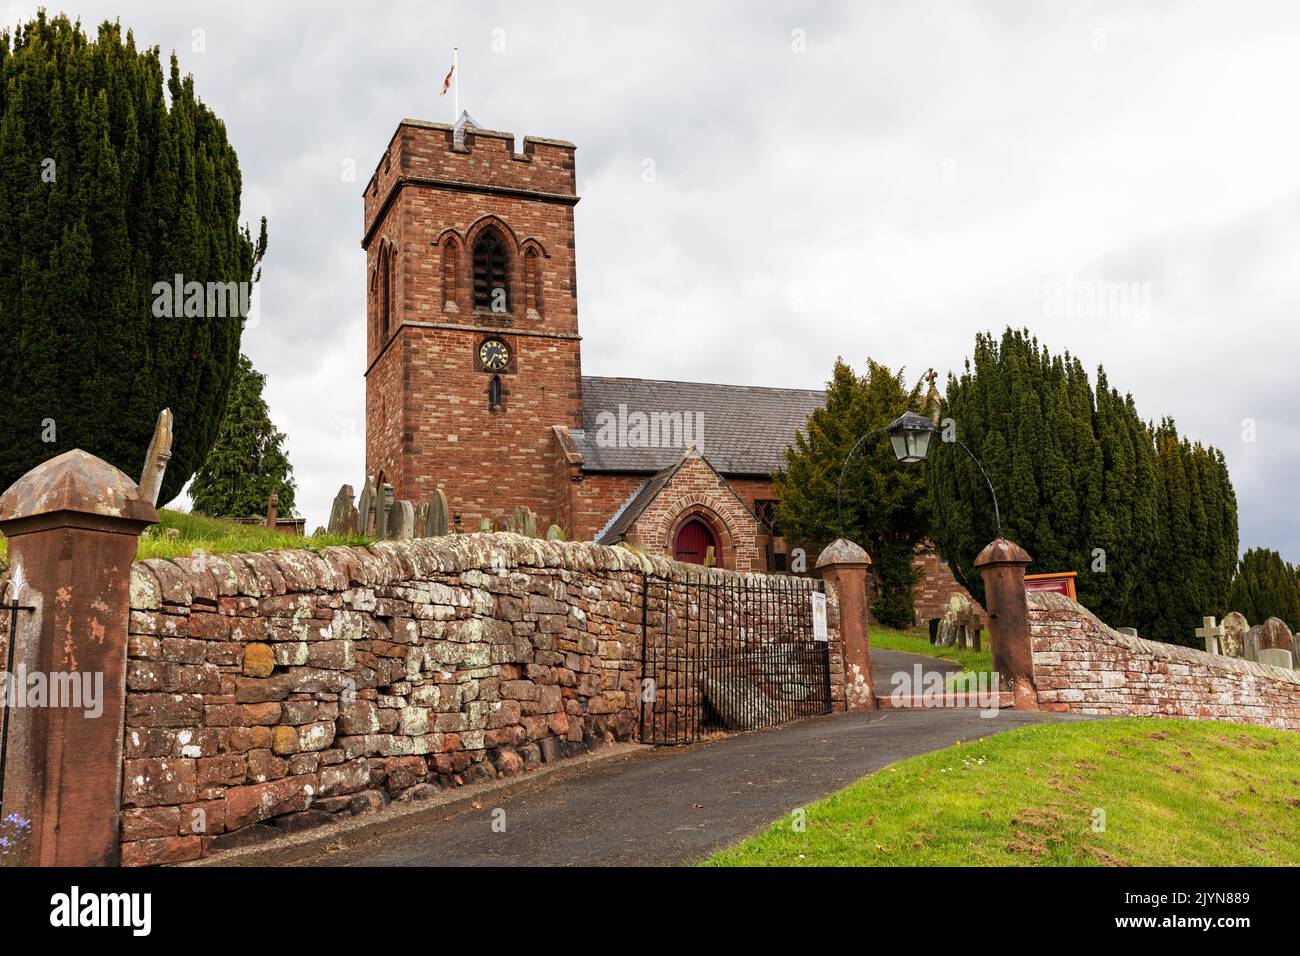 Lazonby St Nicholas. Church of England Diocese, St Nicholas church, A Grade II Listed Building in Lazonby, Cumbria, UK, england, church, churches, Stock Photo